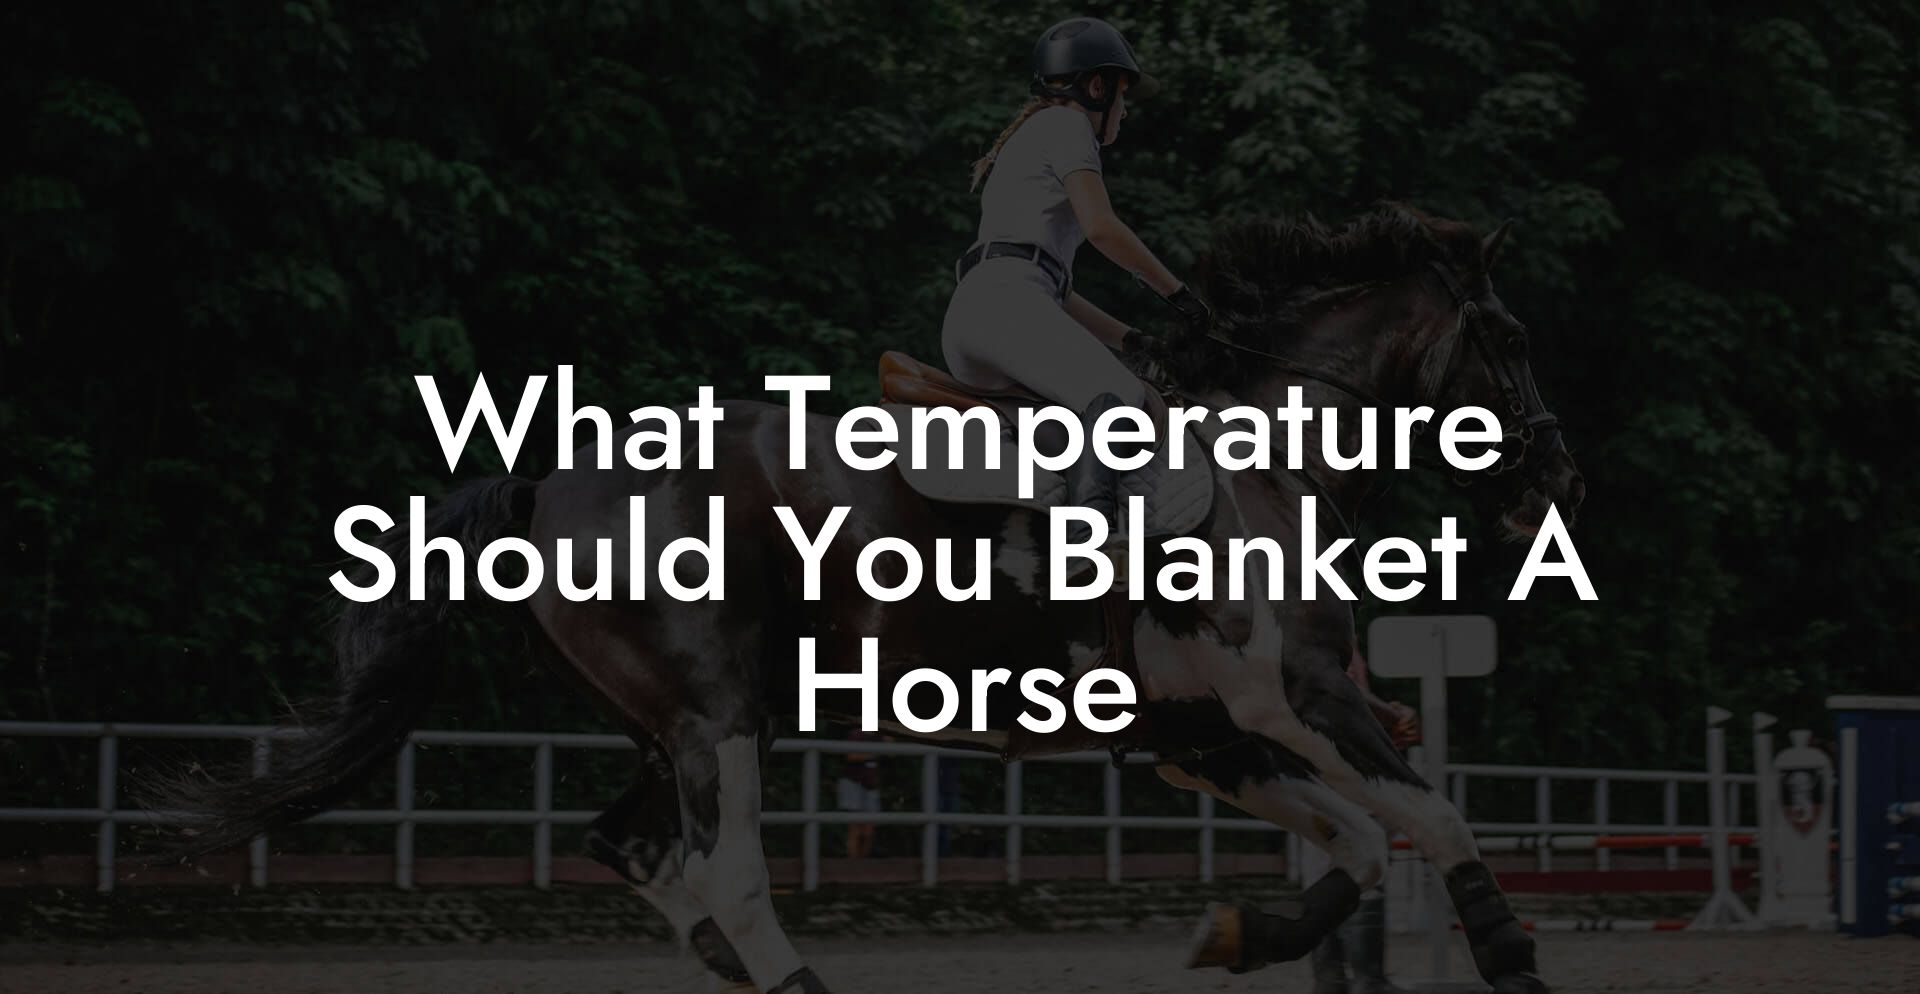 What Temperature Should You Blanket A Horse